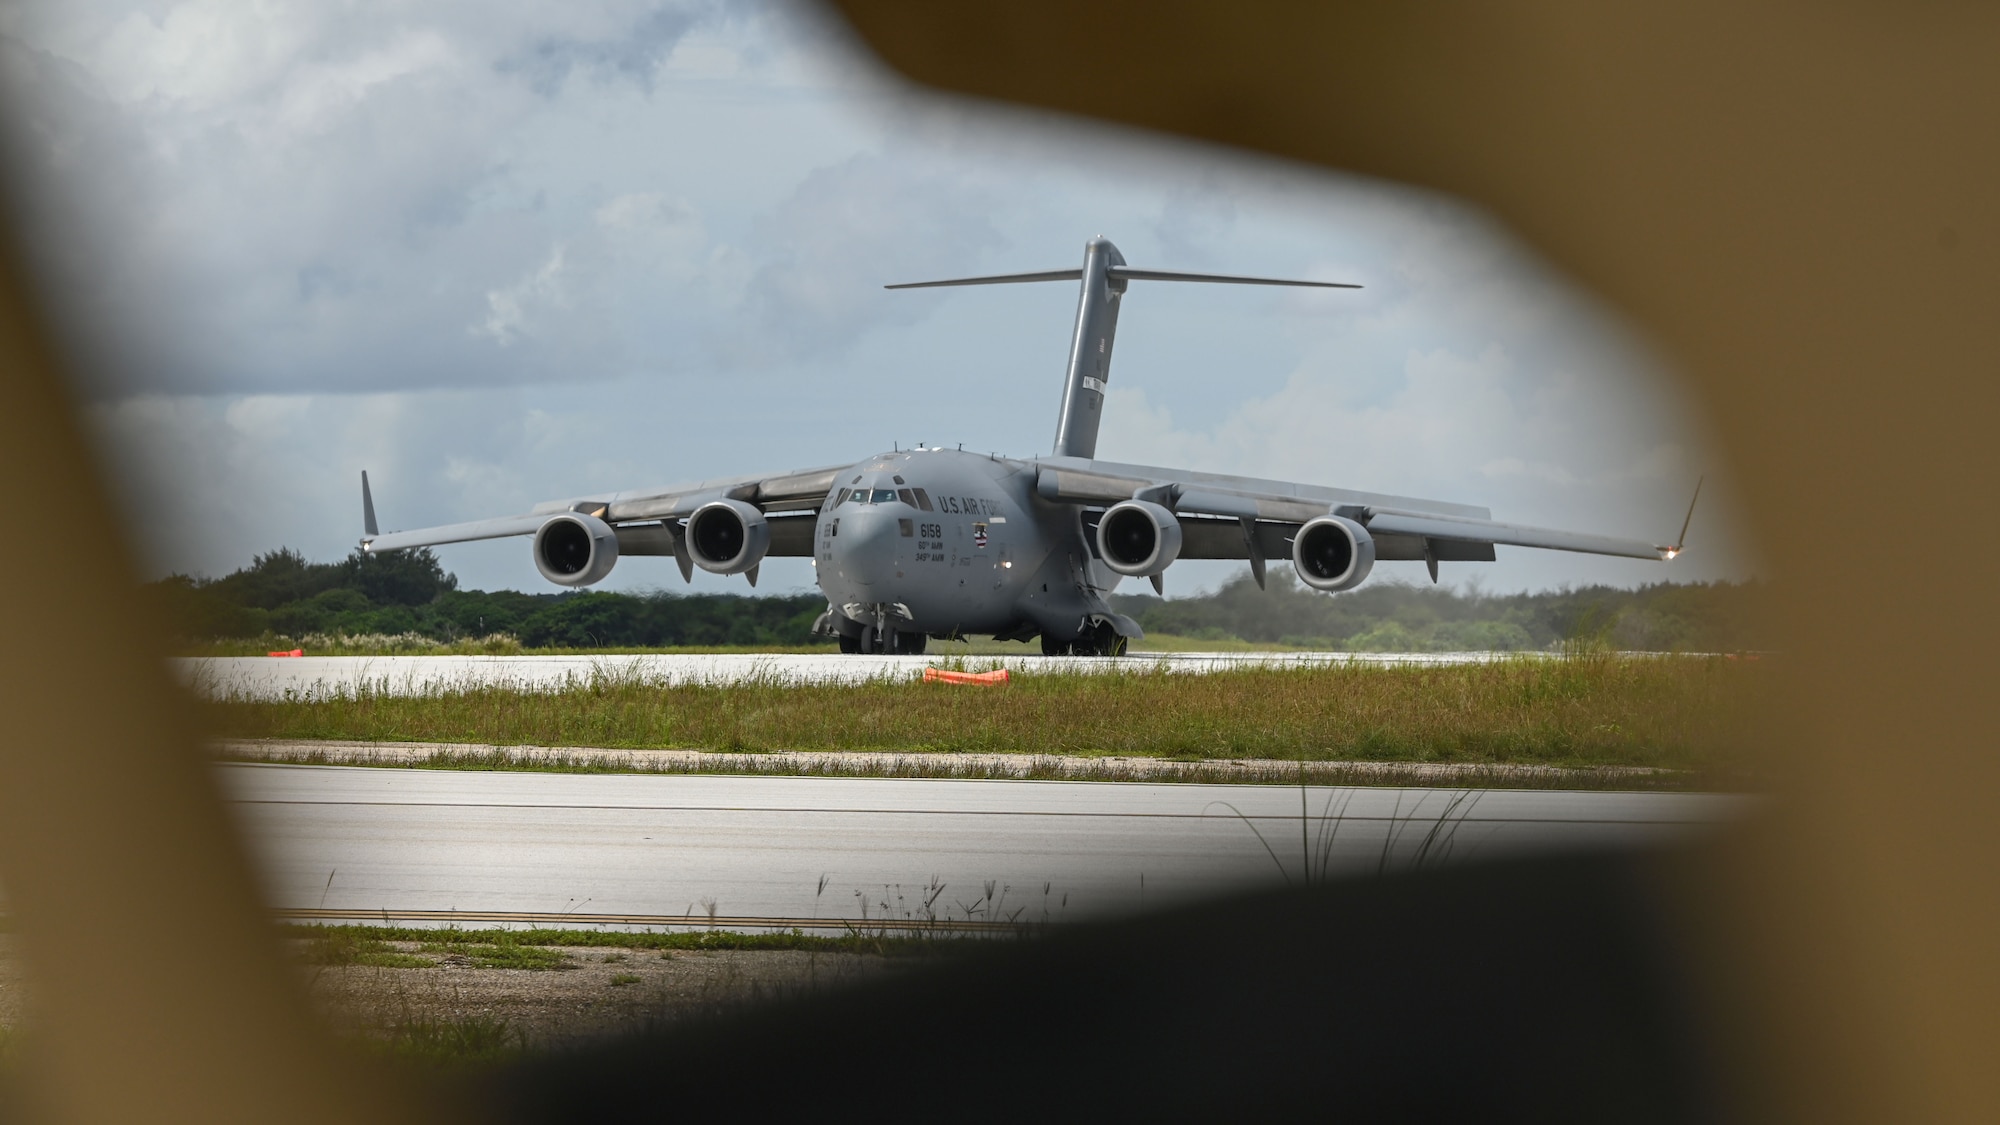 A U.S. Air Force C-17 Globemaster III assigned to Travis Air Force Base, California, lands on Northwest Field during Exercise GOLDEN BEE at Andersen Air Force Base, Guam, Sept. 26, 2022. Exercise GOLDEN BEE is a joint readiness exercise designed to provide training integration and rehearse strategic and operational objectives in support of Agile Combat Employment initiatives in the Indo-Pacific area of responsibility. (U.S. Air Force photo by Staff Sgt. Aubree Owens)